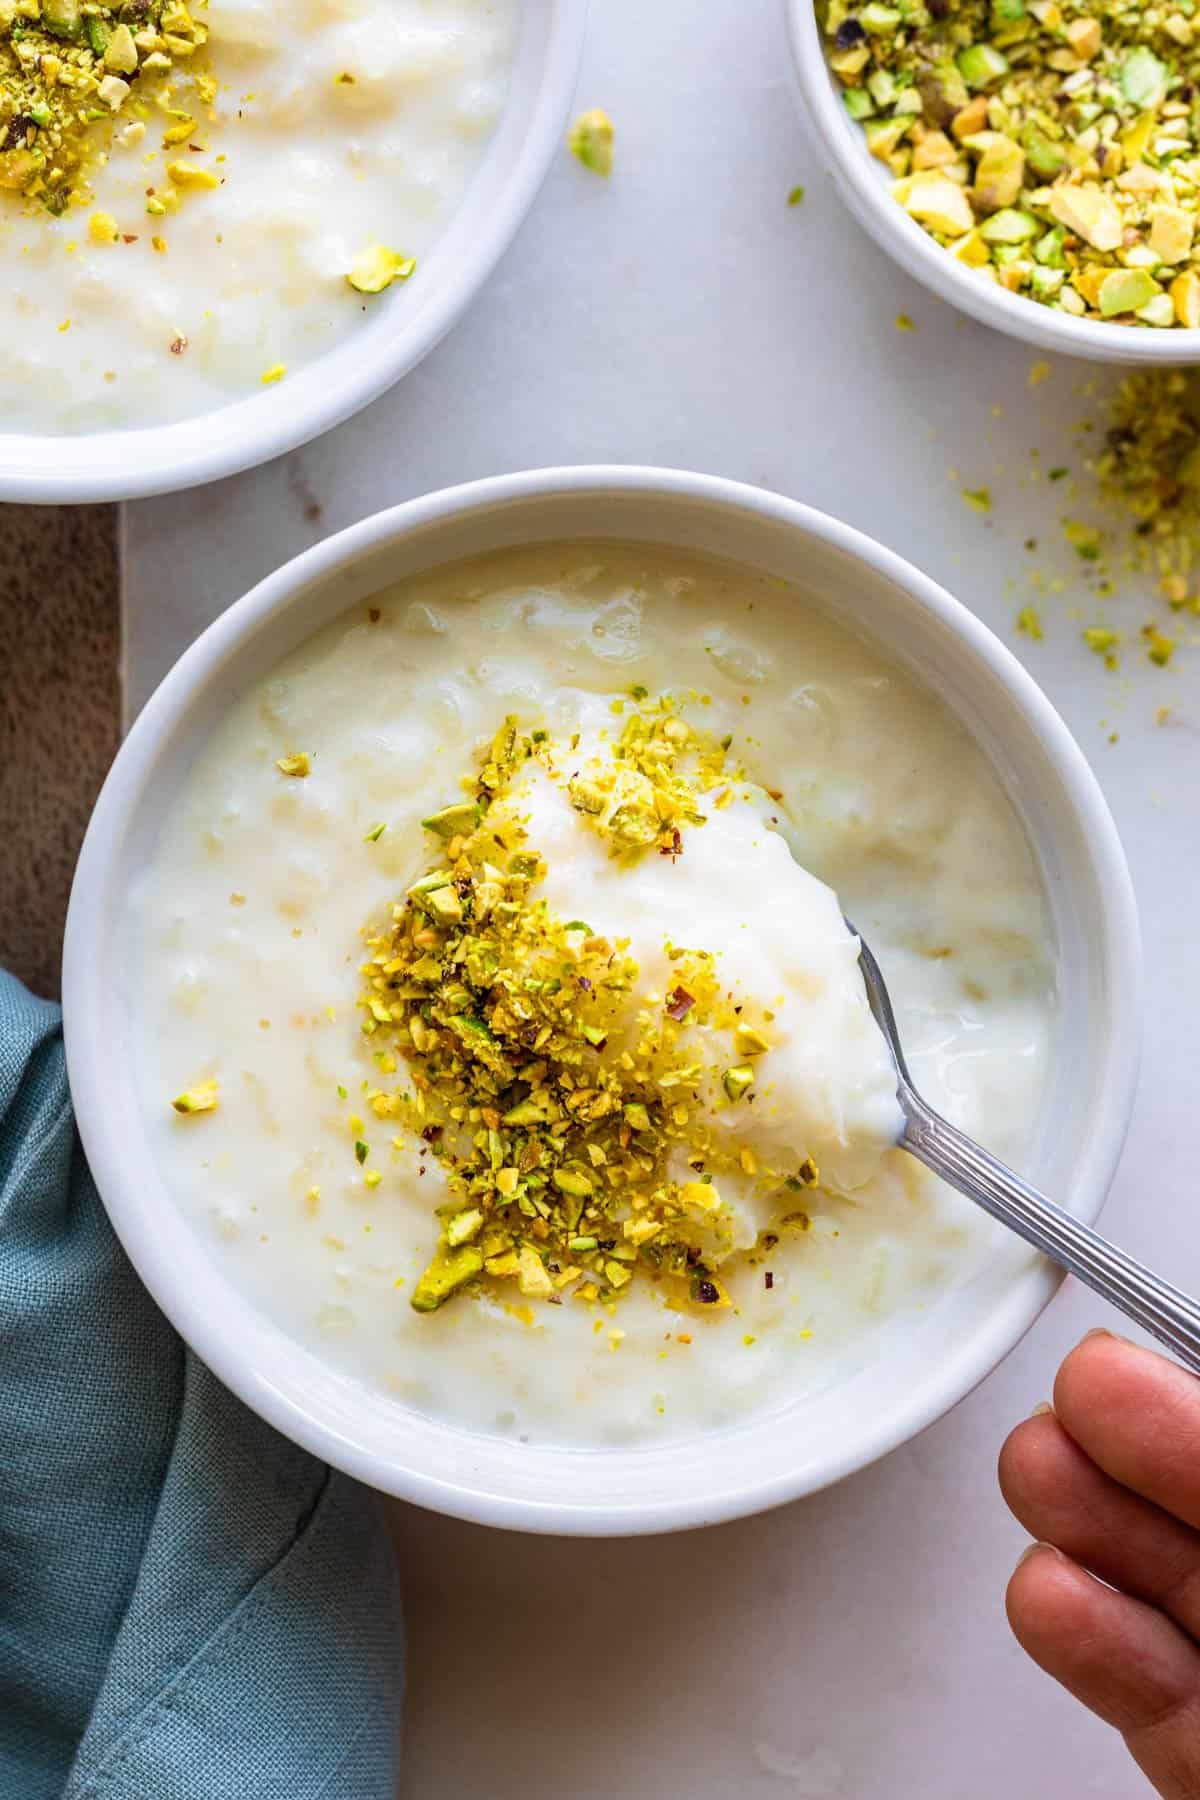 Spoon scooping up rice pudding topped with crushed pistachios.